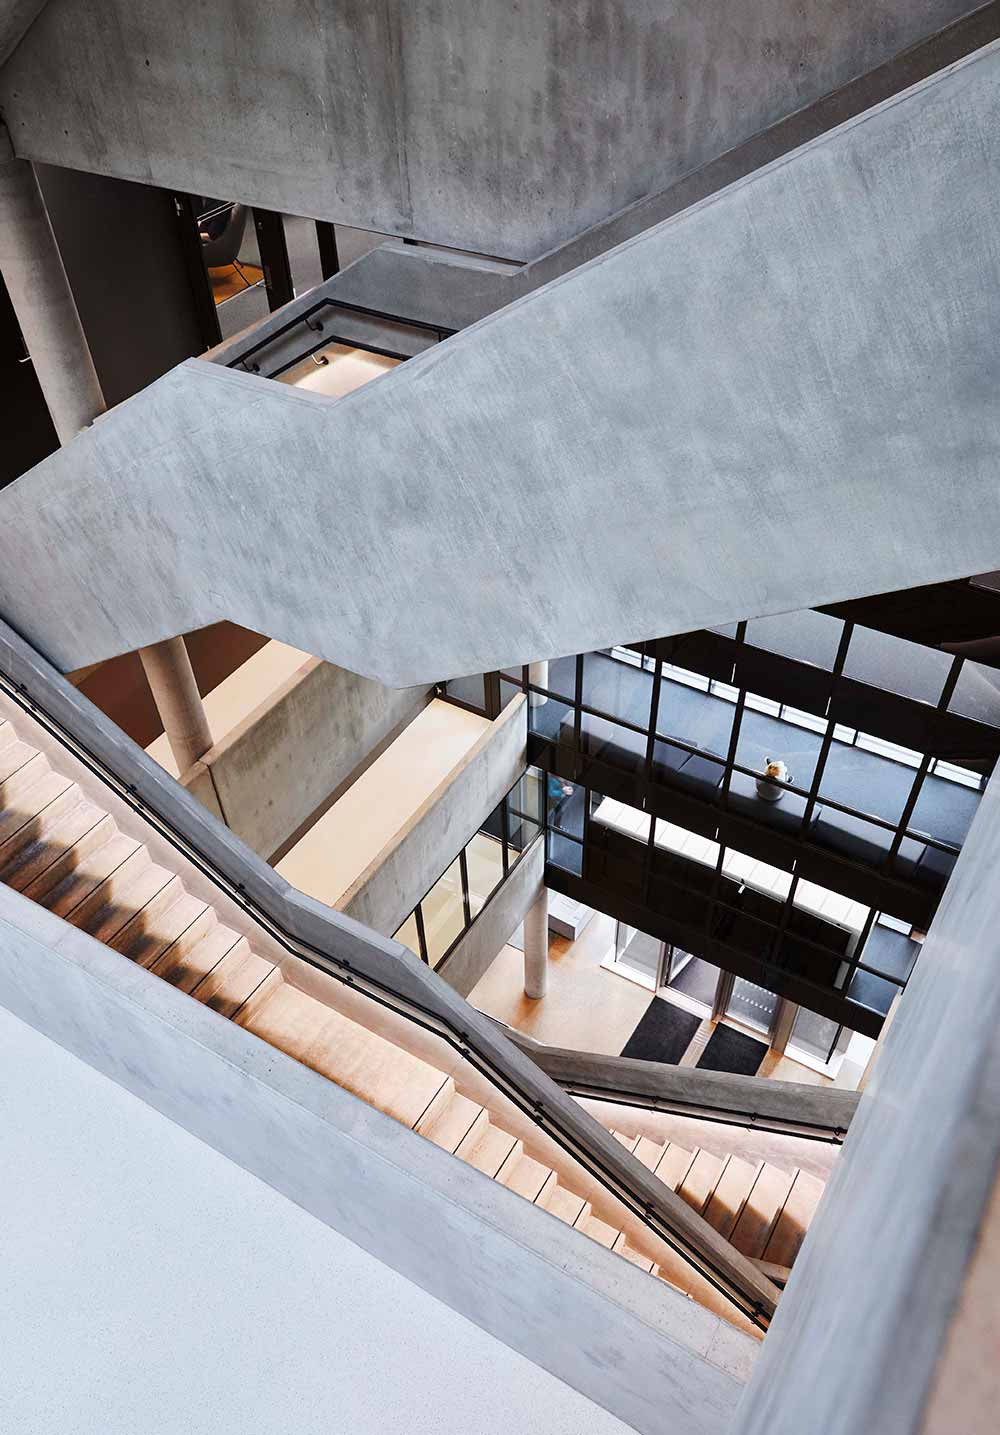 concrete interior stairwell at Vipps modern office building